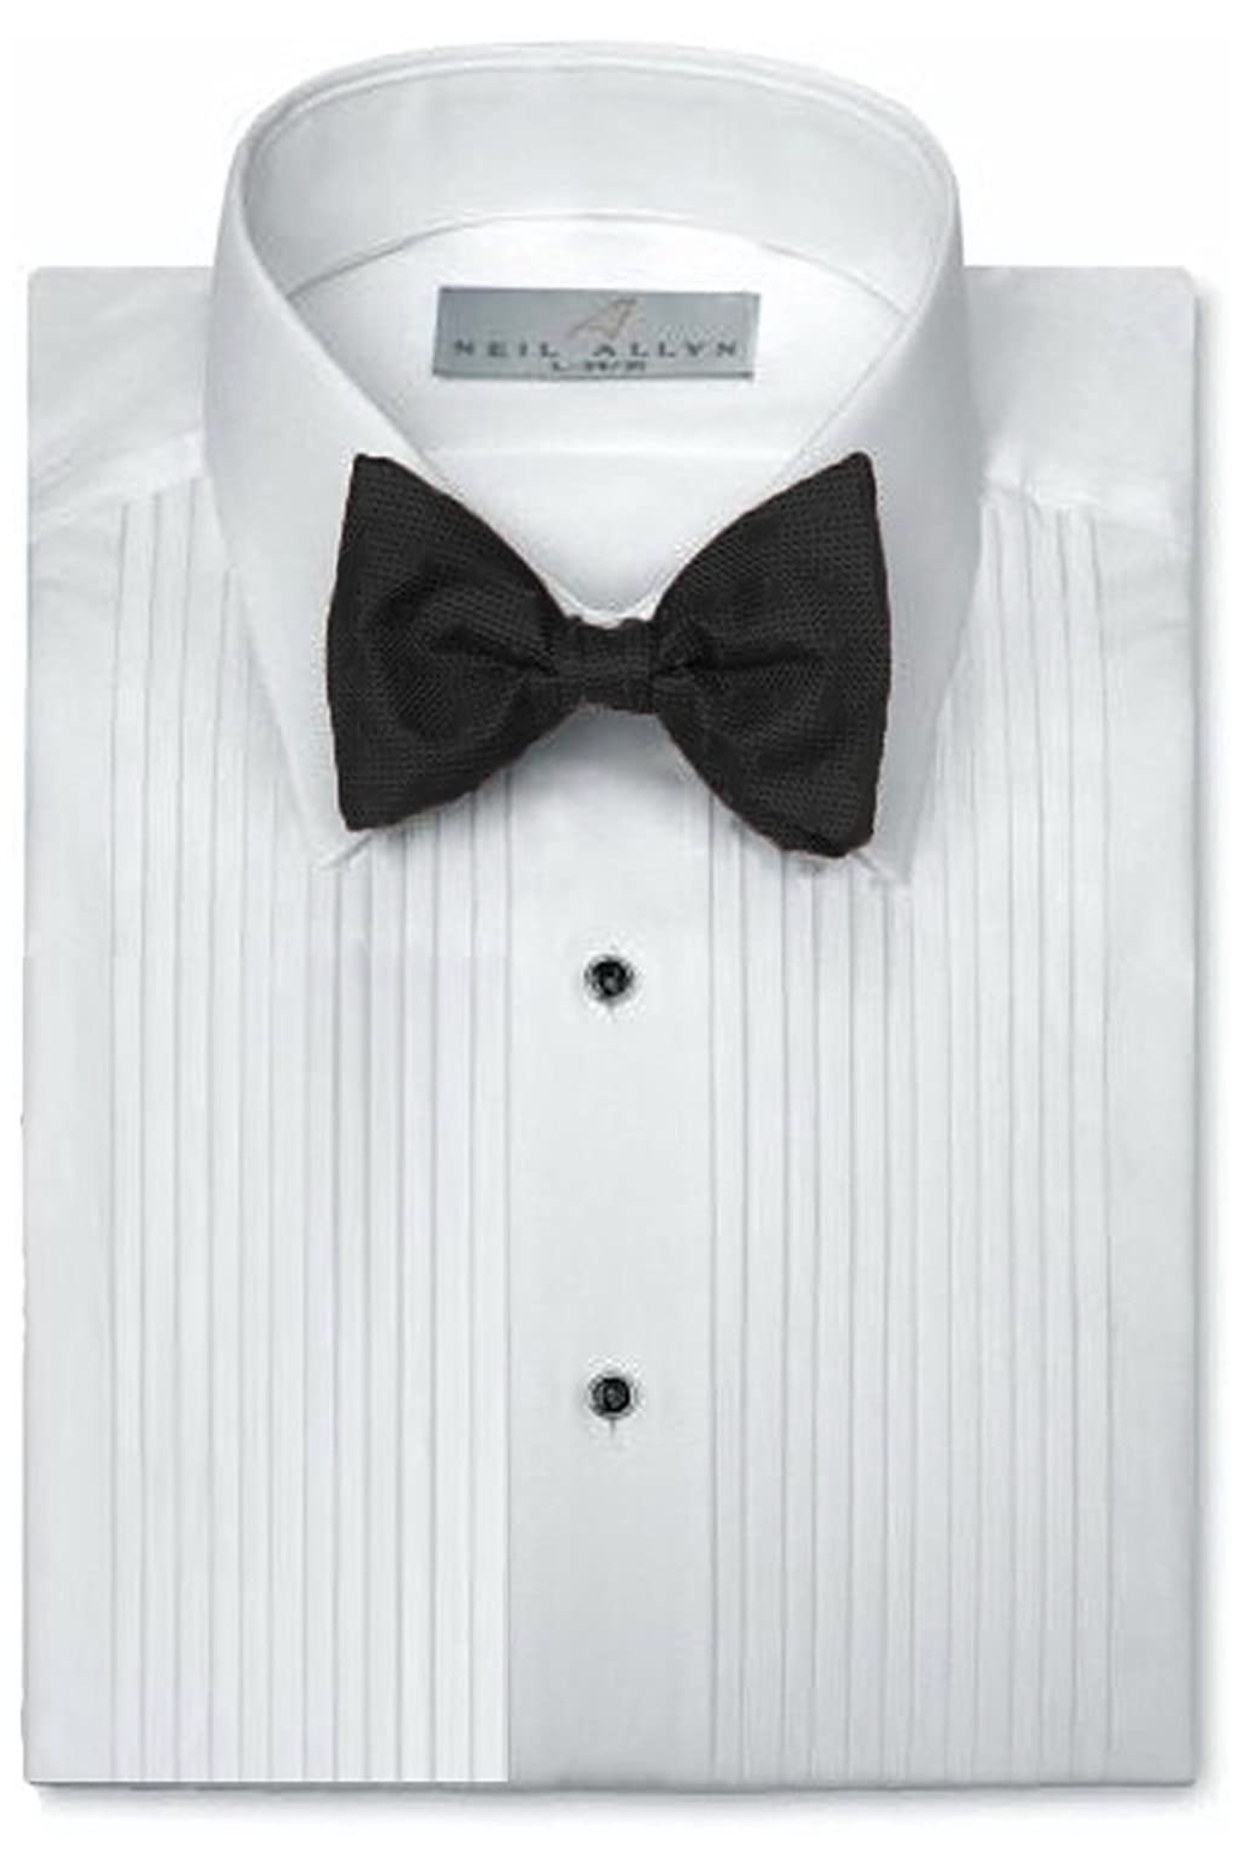 Neil Allyn Regular Fit Laydown Collar Tuxedo Shirt in a Polycotton Blend with 1/4" Pleats and Barrel Cuffs